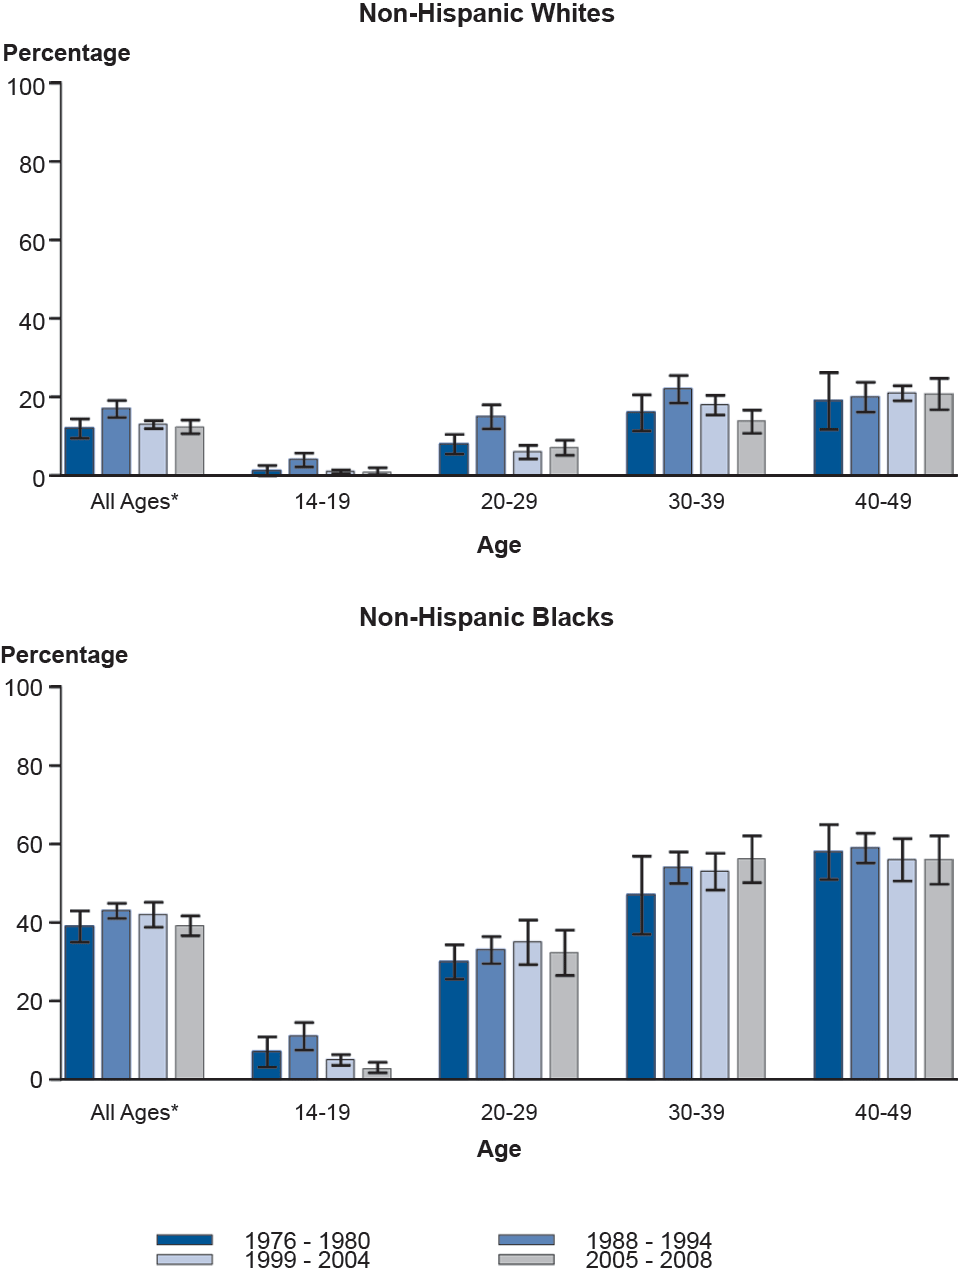 Figure 56. Herpes Simplex Virus Type 2—Seroprevalence in Non-Hispanic Whites and Non-Hispanic Blacks by Age Group, National Health and Nutrition Examination Survey, 1976–1980, 1988–1994, 1999–2004, 2005–2008